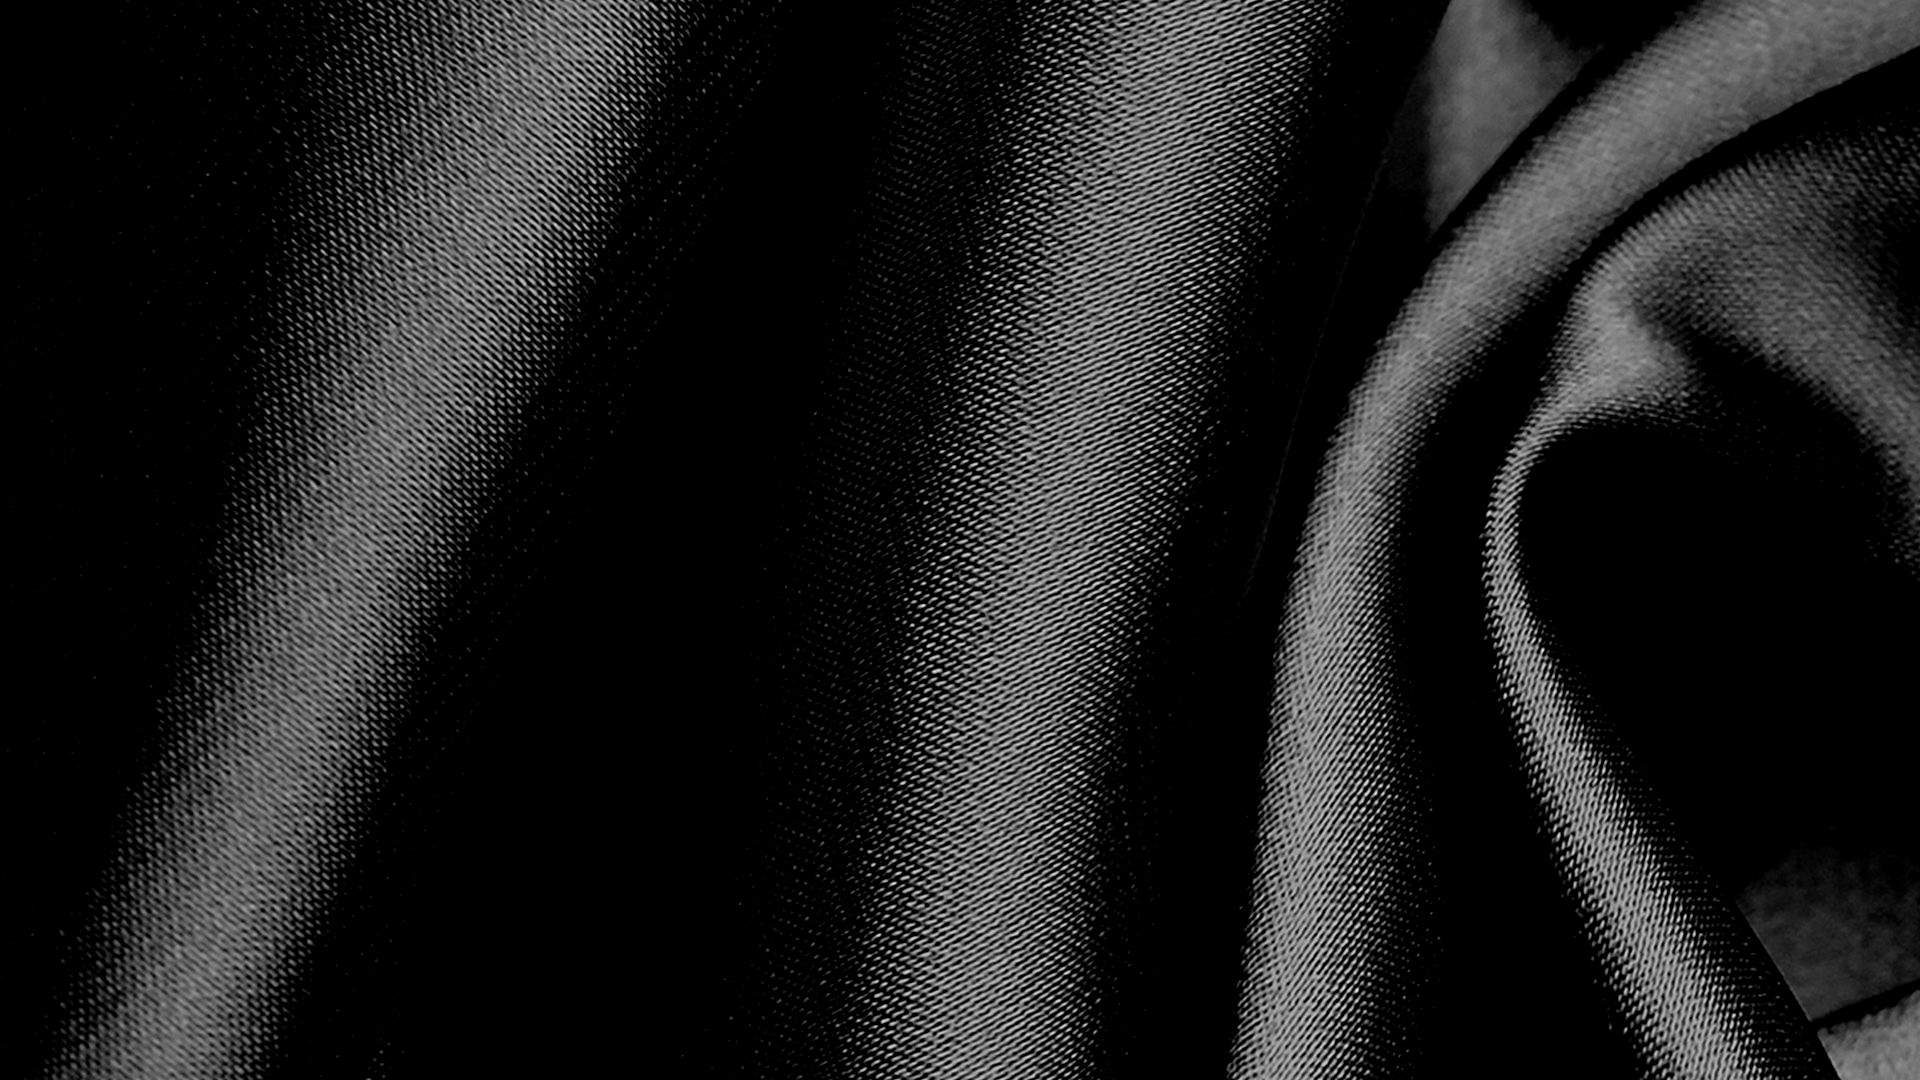 Black Silk iPhone 6 Wallpaper with high-resolution 1920x1080 pixel. You can use this wallpaper for your iPhone 5, 6, 7, 8, X, XS, XR backgrounds, Mobile Screensaver, or iPad Lock Screen